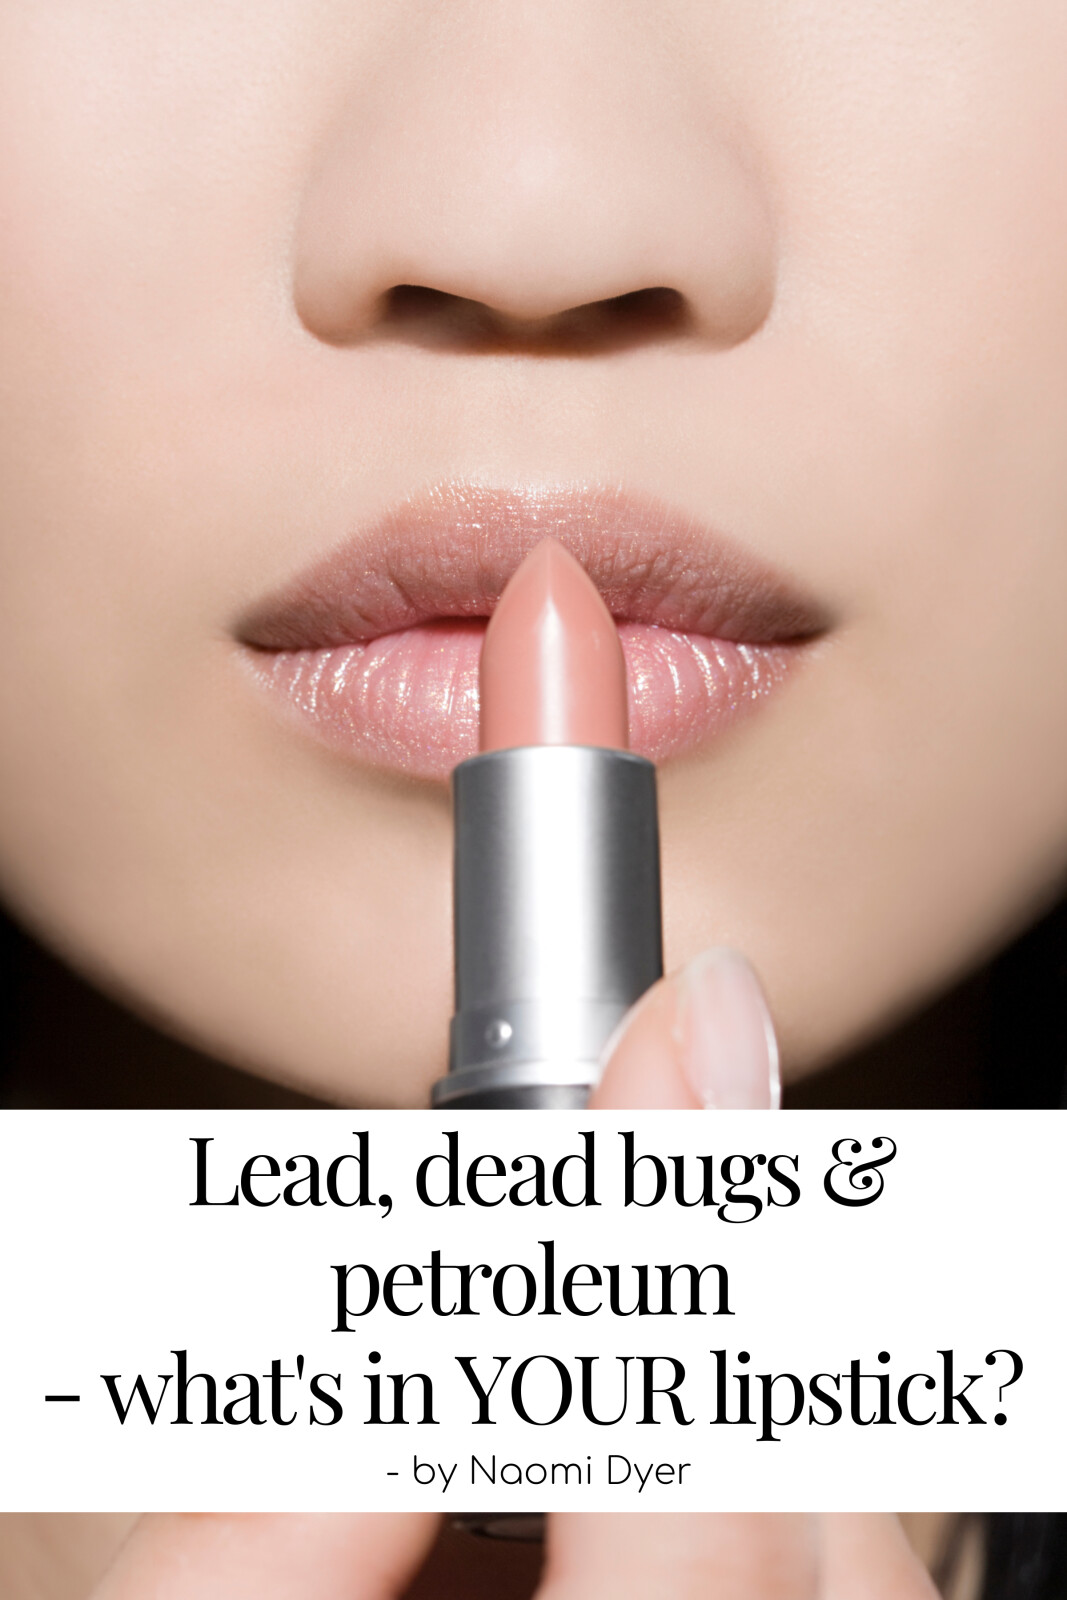 Lead, dead bugs & petroleum - what's in YOUR lipstick? 